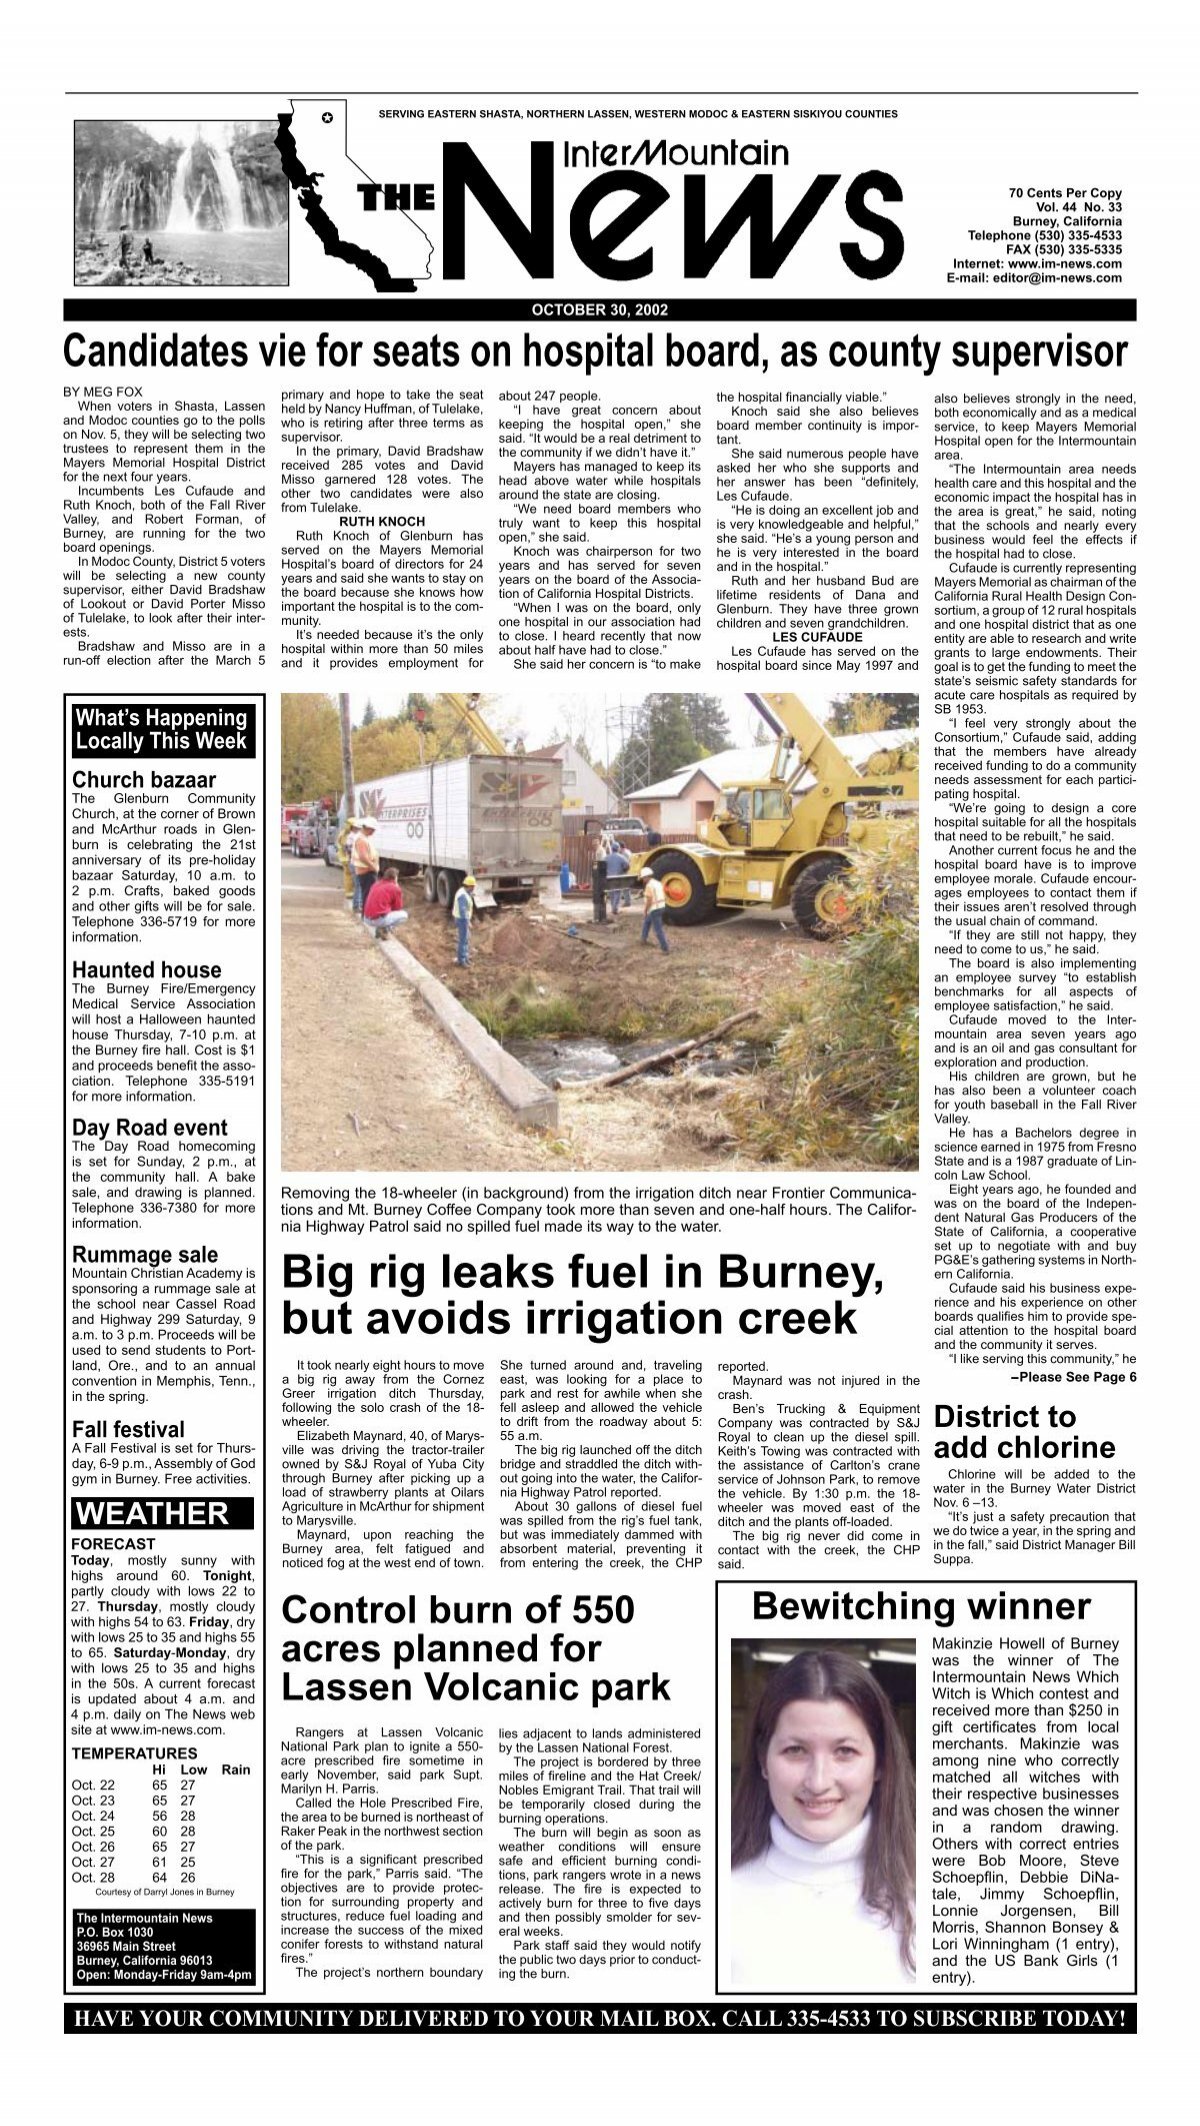 Big rig leaks fuel in Burney, but avoids - Intermountain News